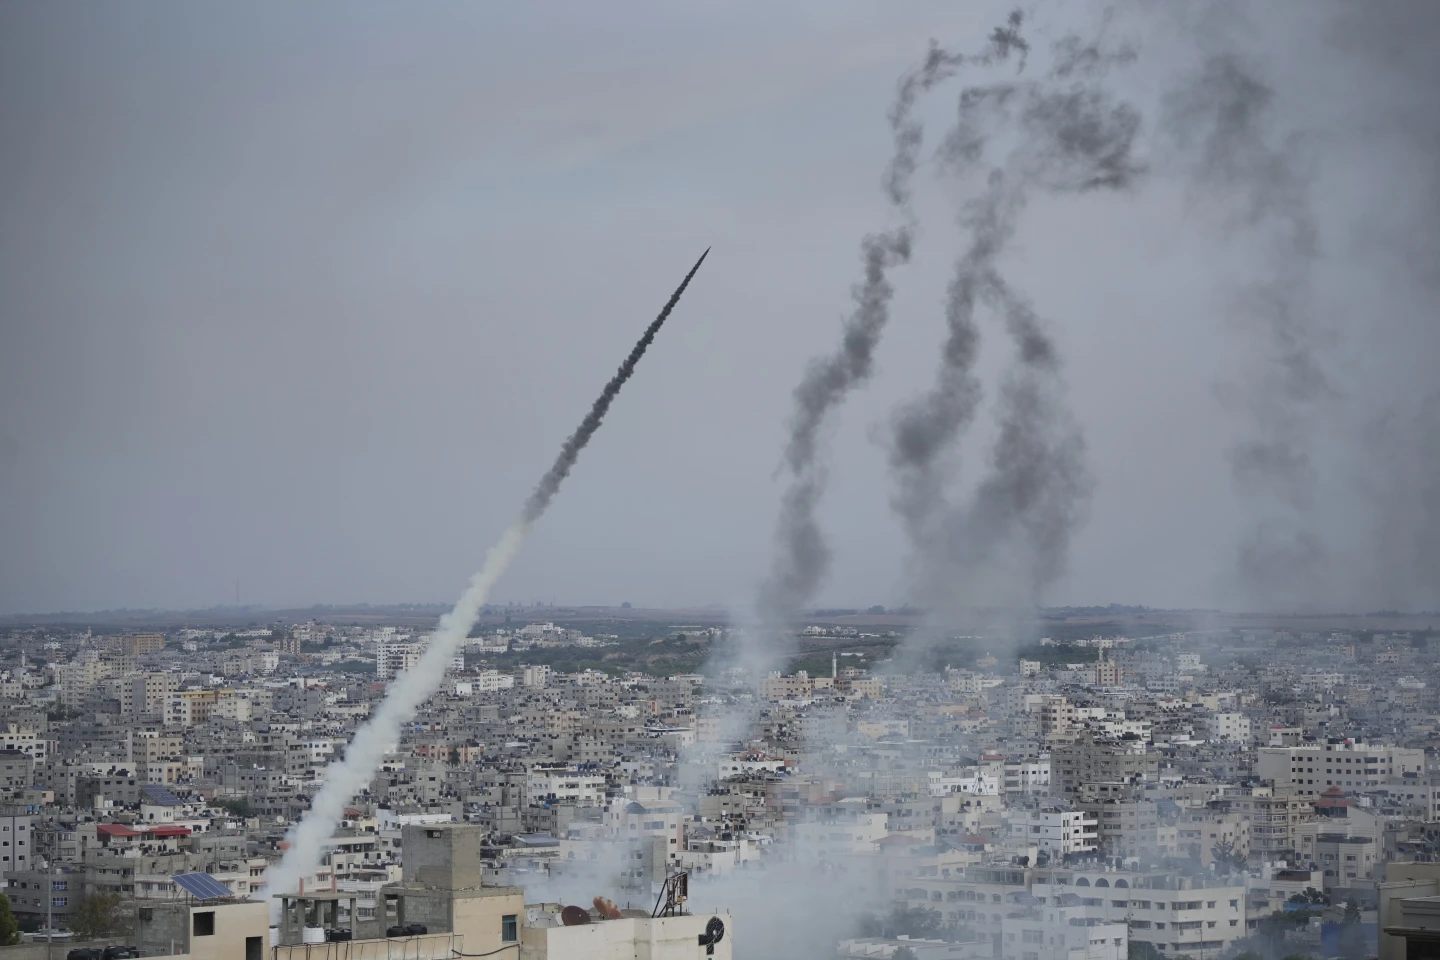 5 things to know about the Hamas militant group’s unprecedented attack on Israel